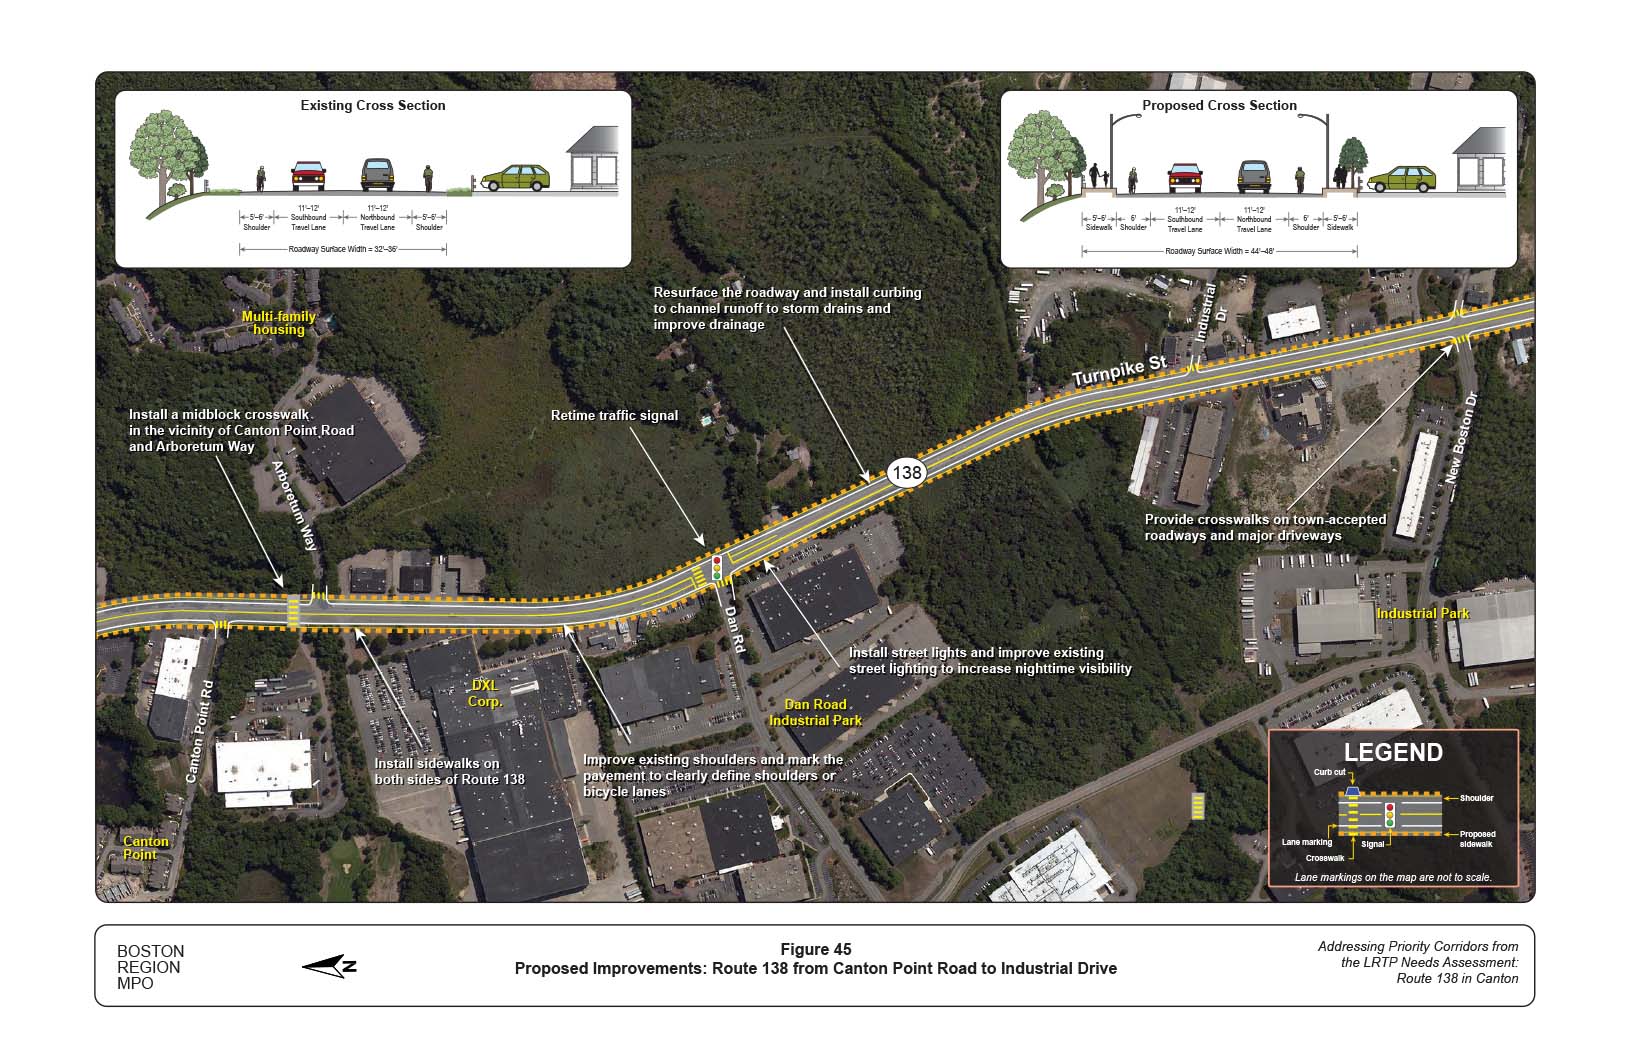 Figure 45 is map of Route 138 from Canton Point Road to Industrial Drive with overlays showing the proposed improvements to the roadway and graphics of the current and proposed cross section of the roadway.